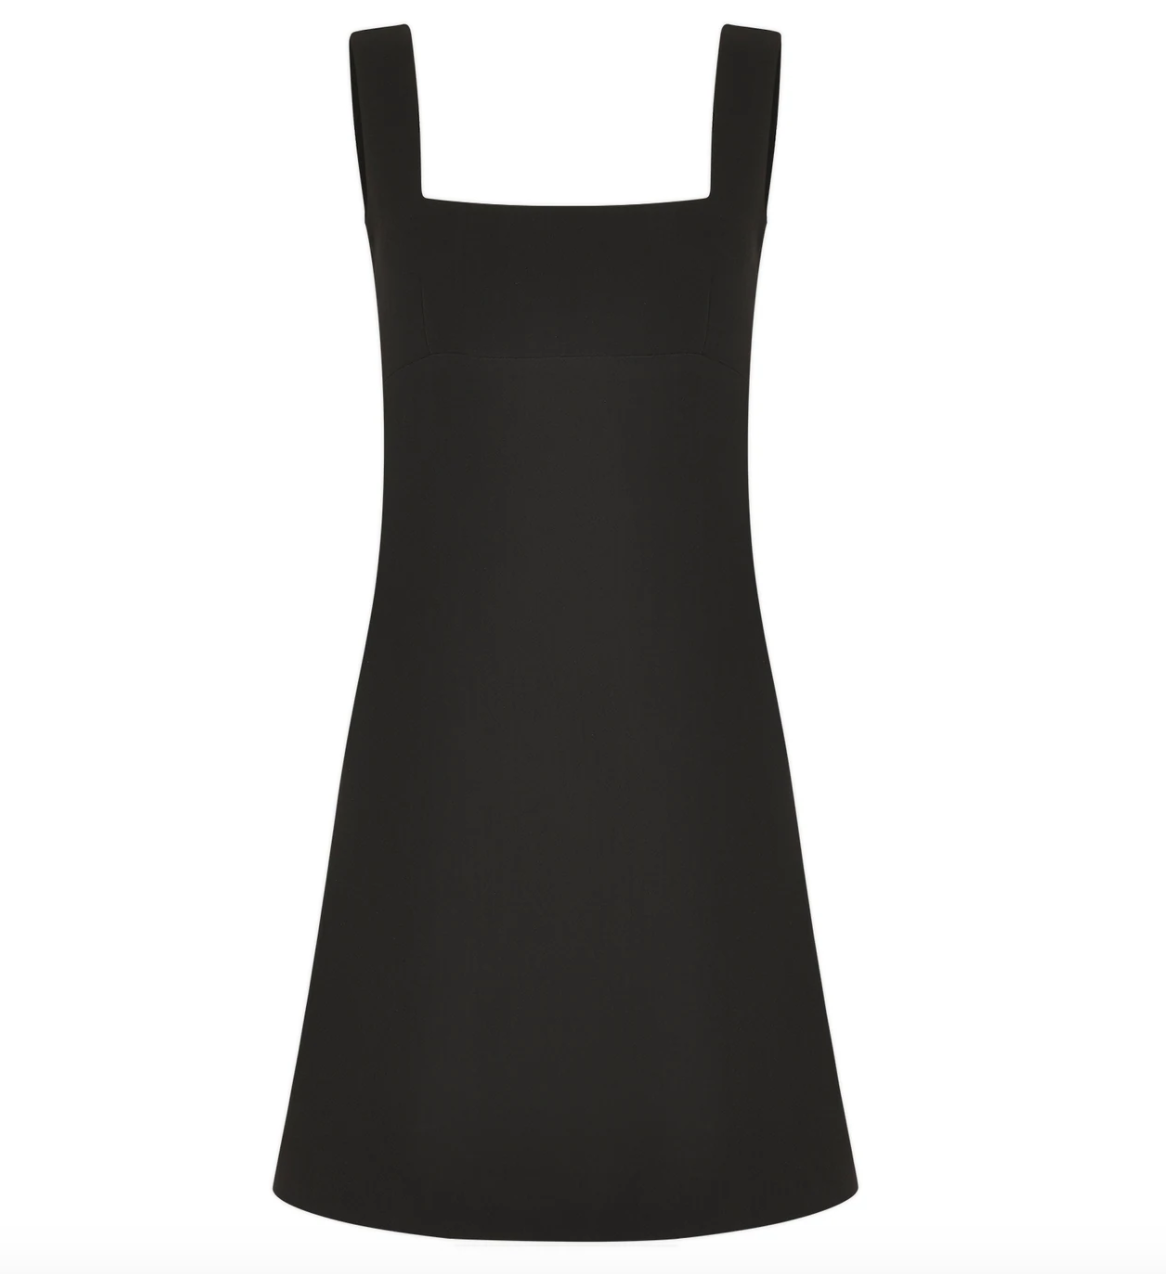 10-timeless-fashion-items-we-all-should-invest-in-alexa-chung-black-dress